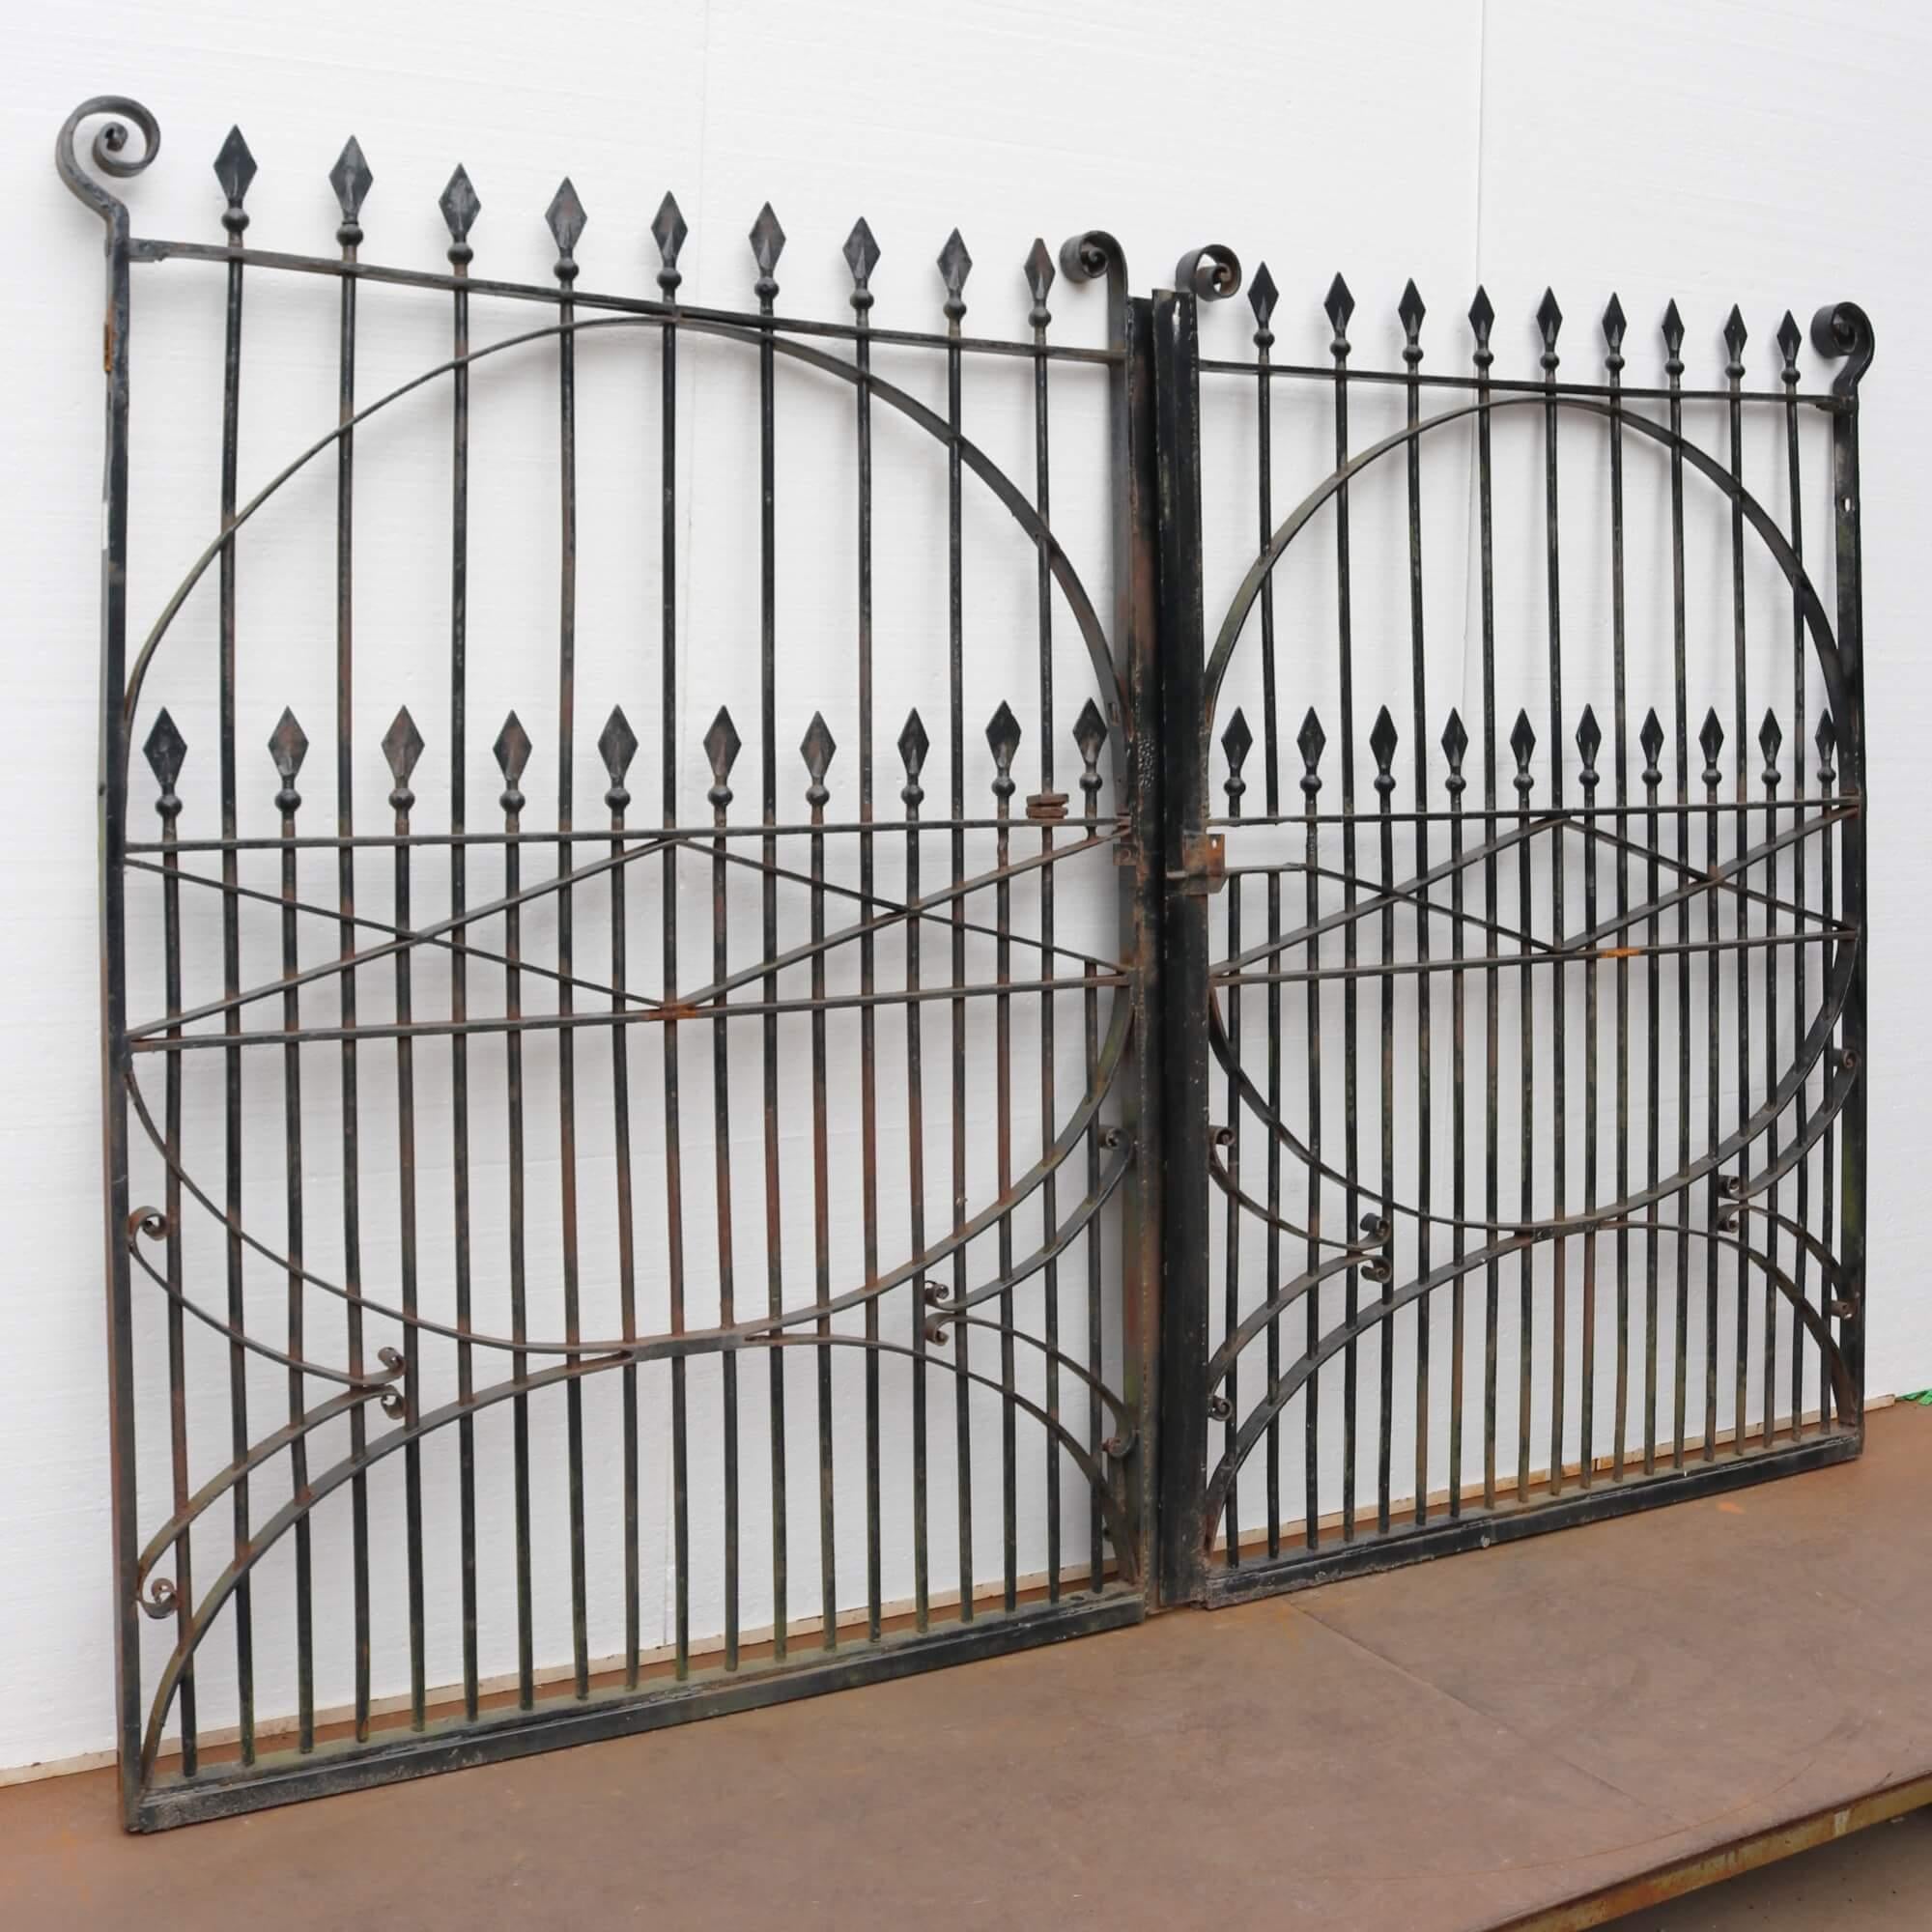 Set of Georgian Style Wrought Iron Driveway Gates 270 cm (8’8”) In Fair Condition For Sale In Wormelow, Herefordshire